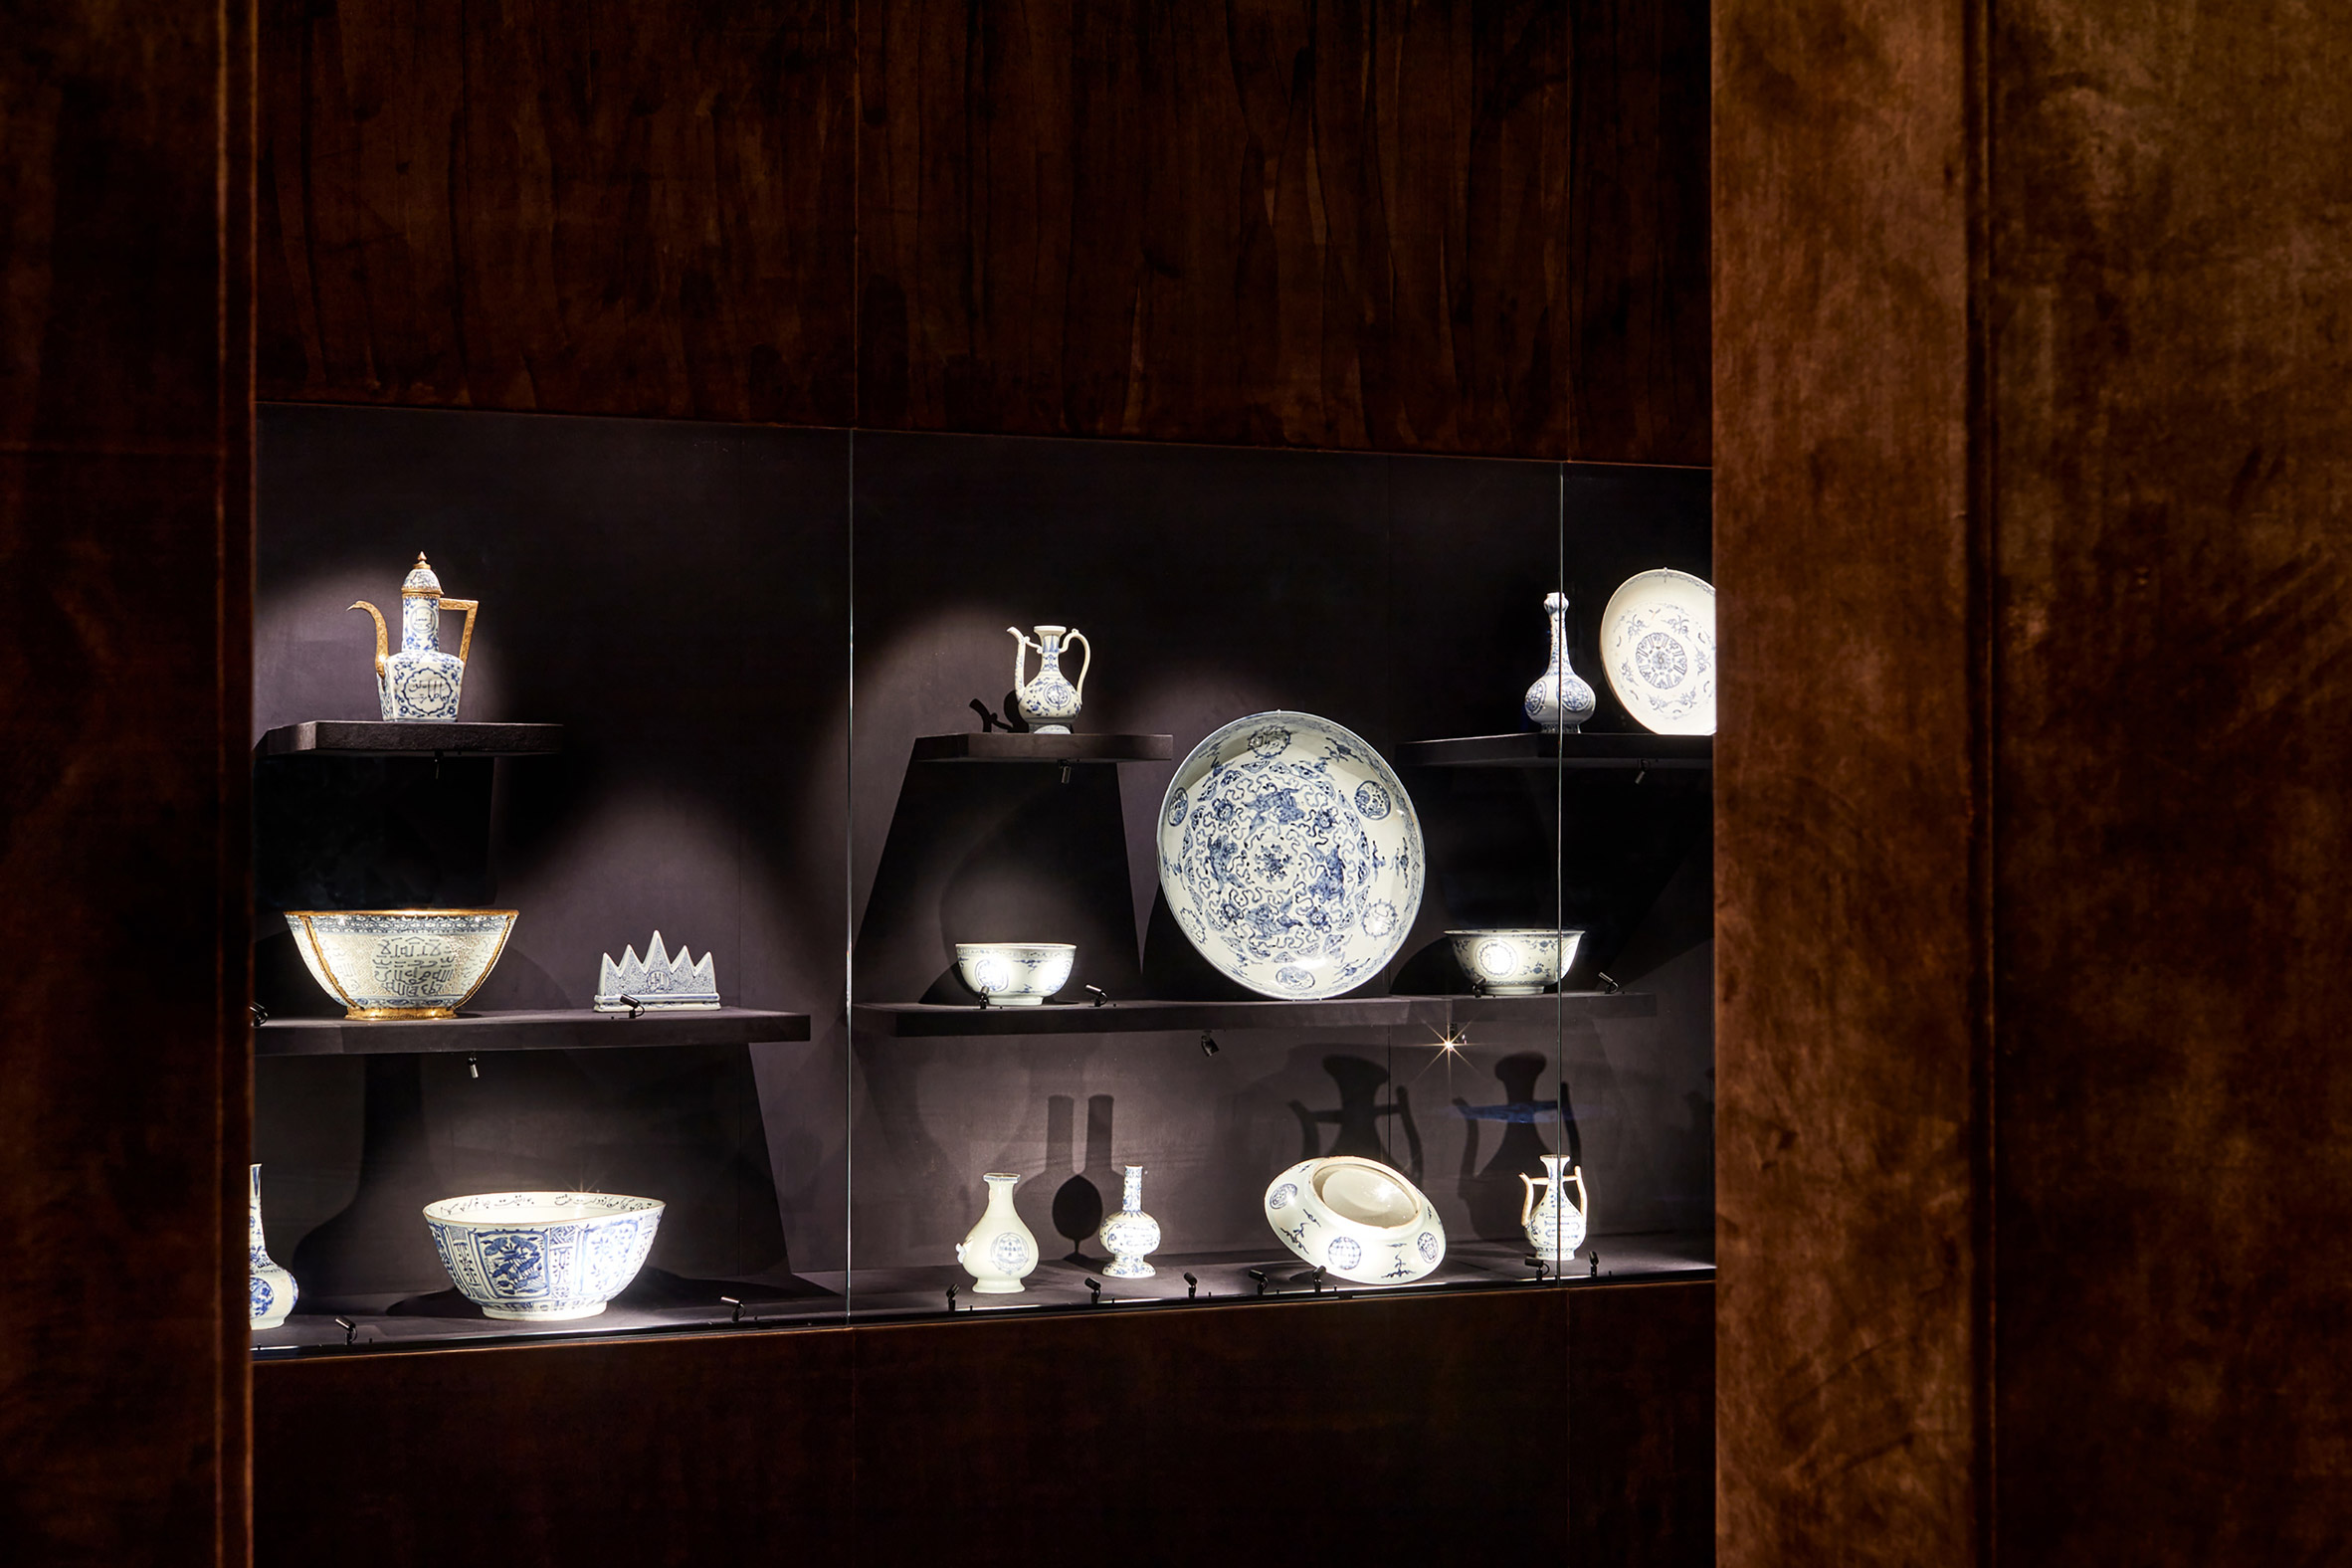 The First Orders room in the Porcelain Room exhibition designed by Tom Postma Design for the Fondazione Prada